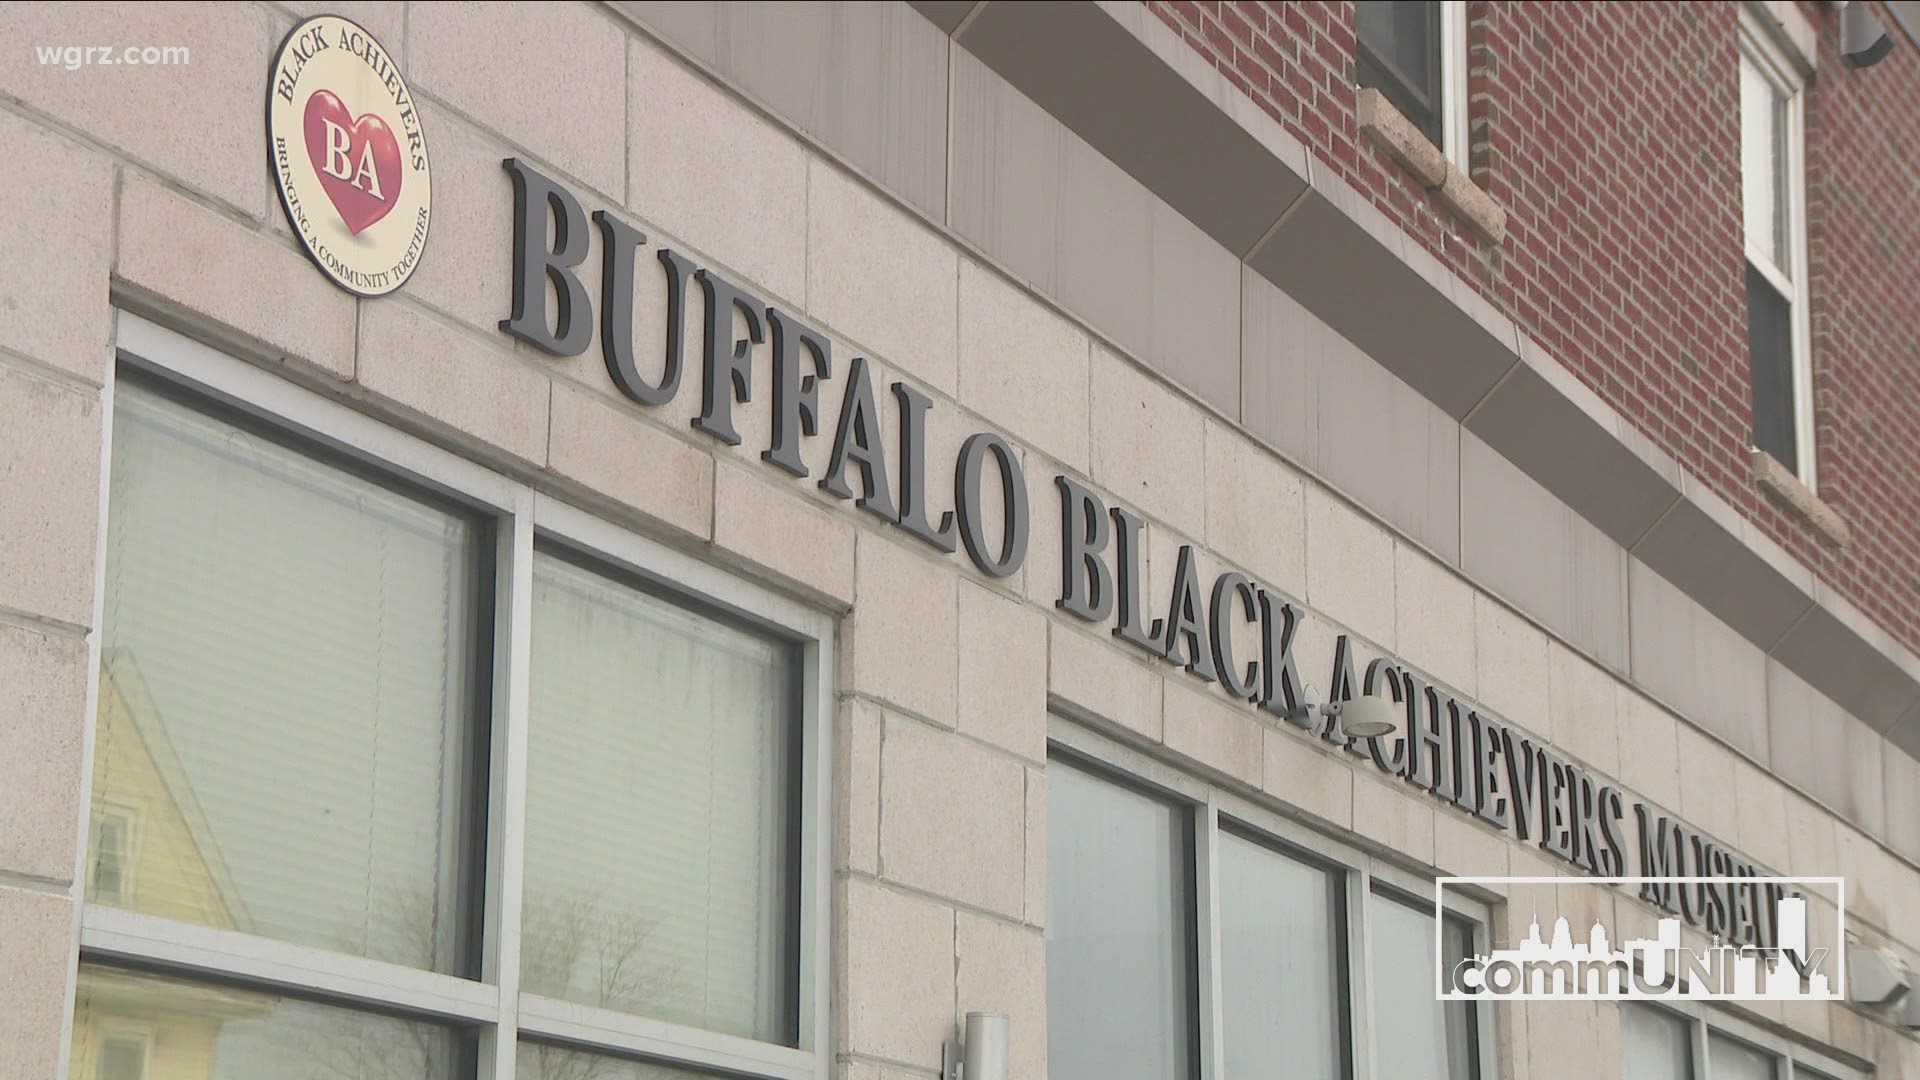 There is a Buffalo Black Achievers Museum to  permanently house standing exhibitions and archival resources.